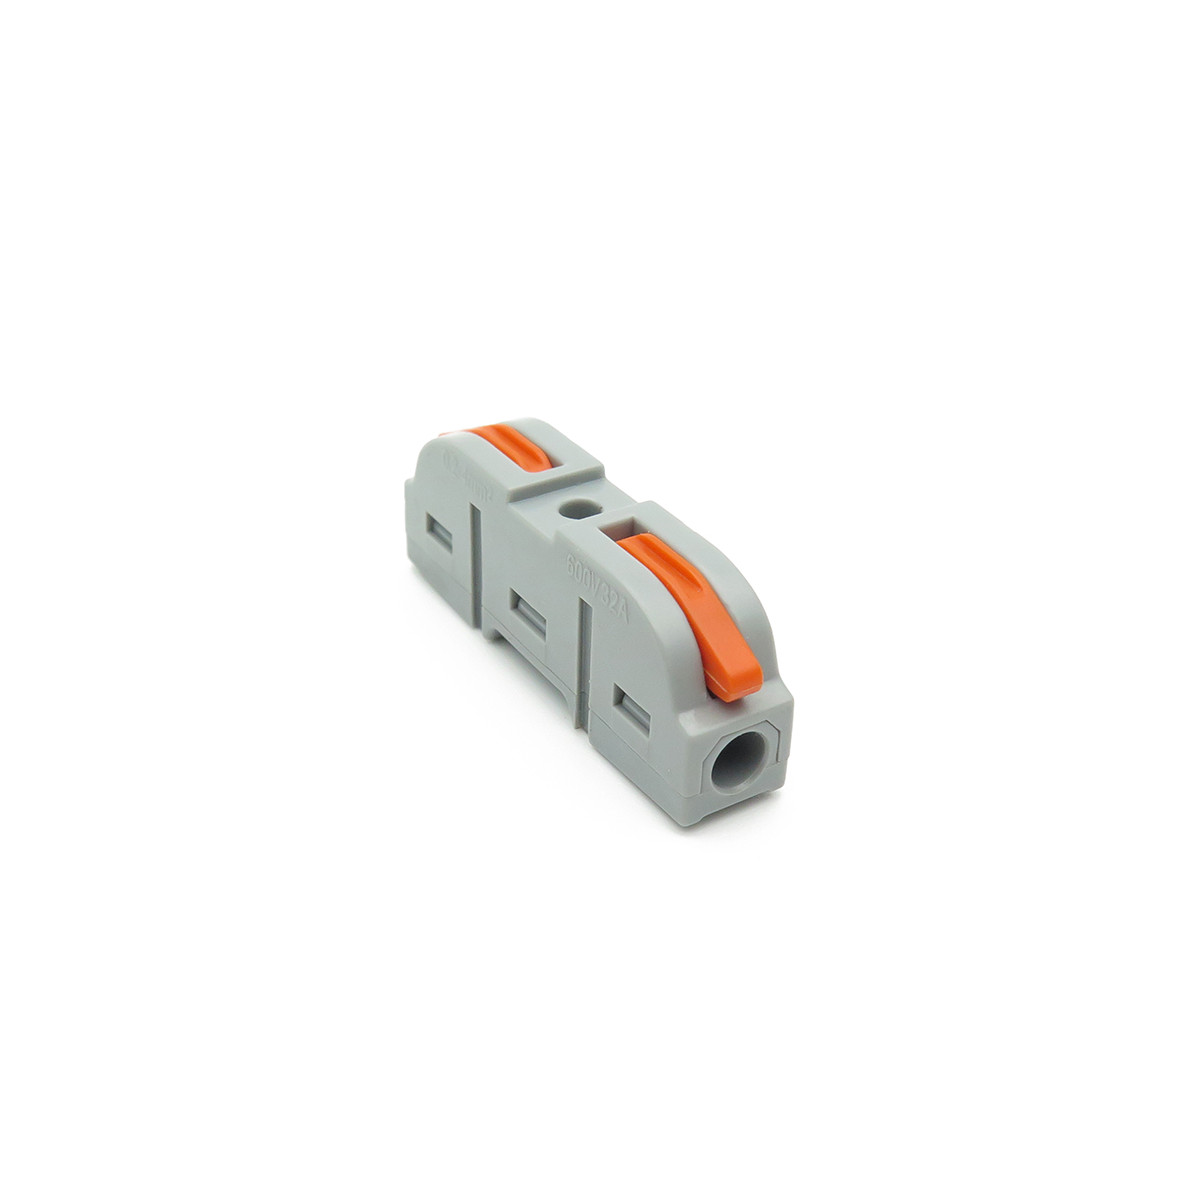 Quick connector 1 input 1 output 0.2-4mm²